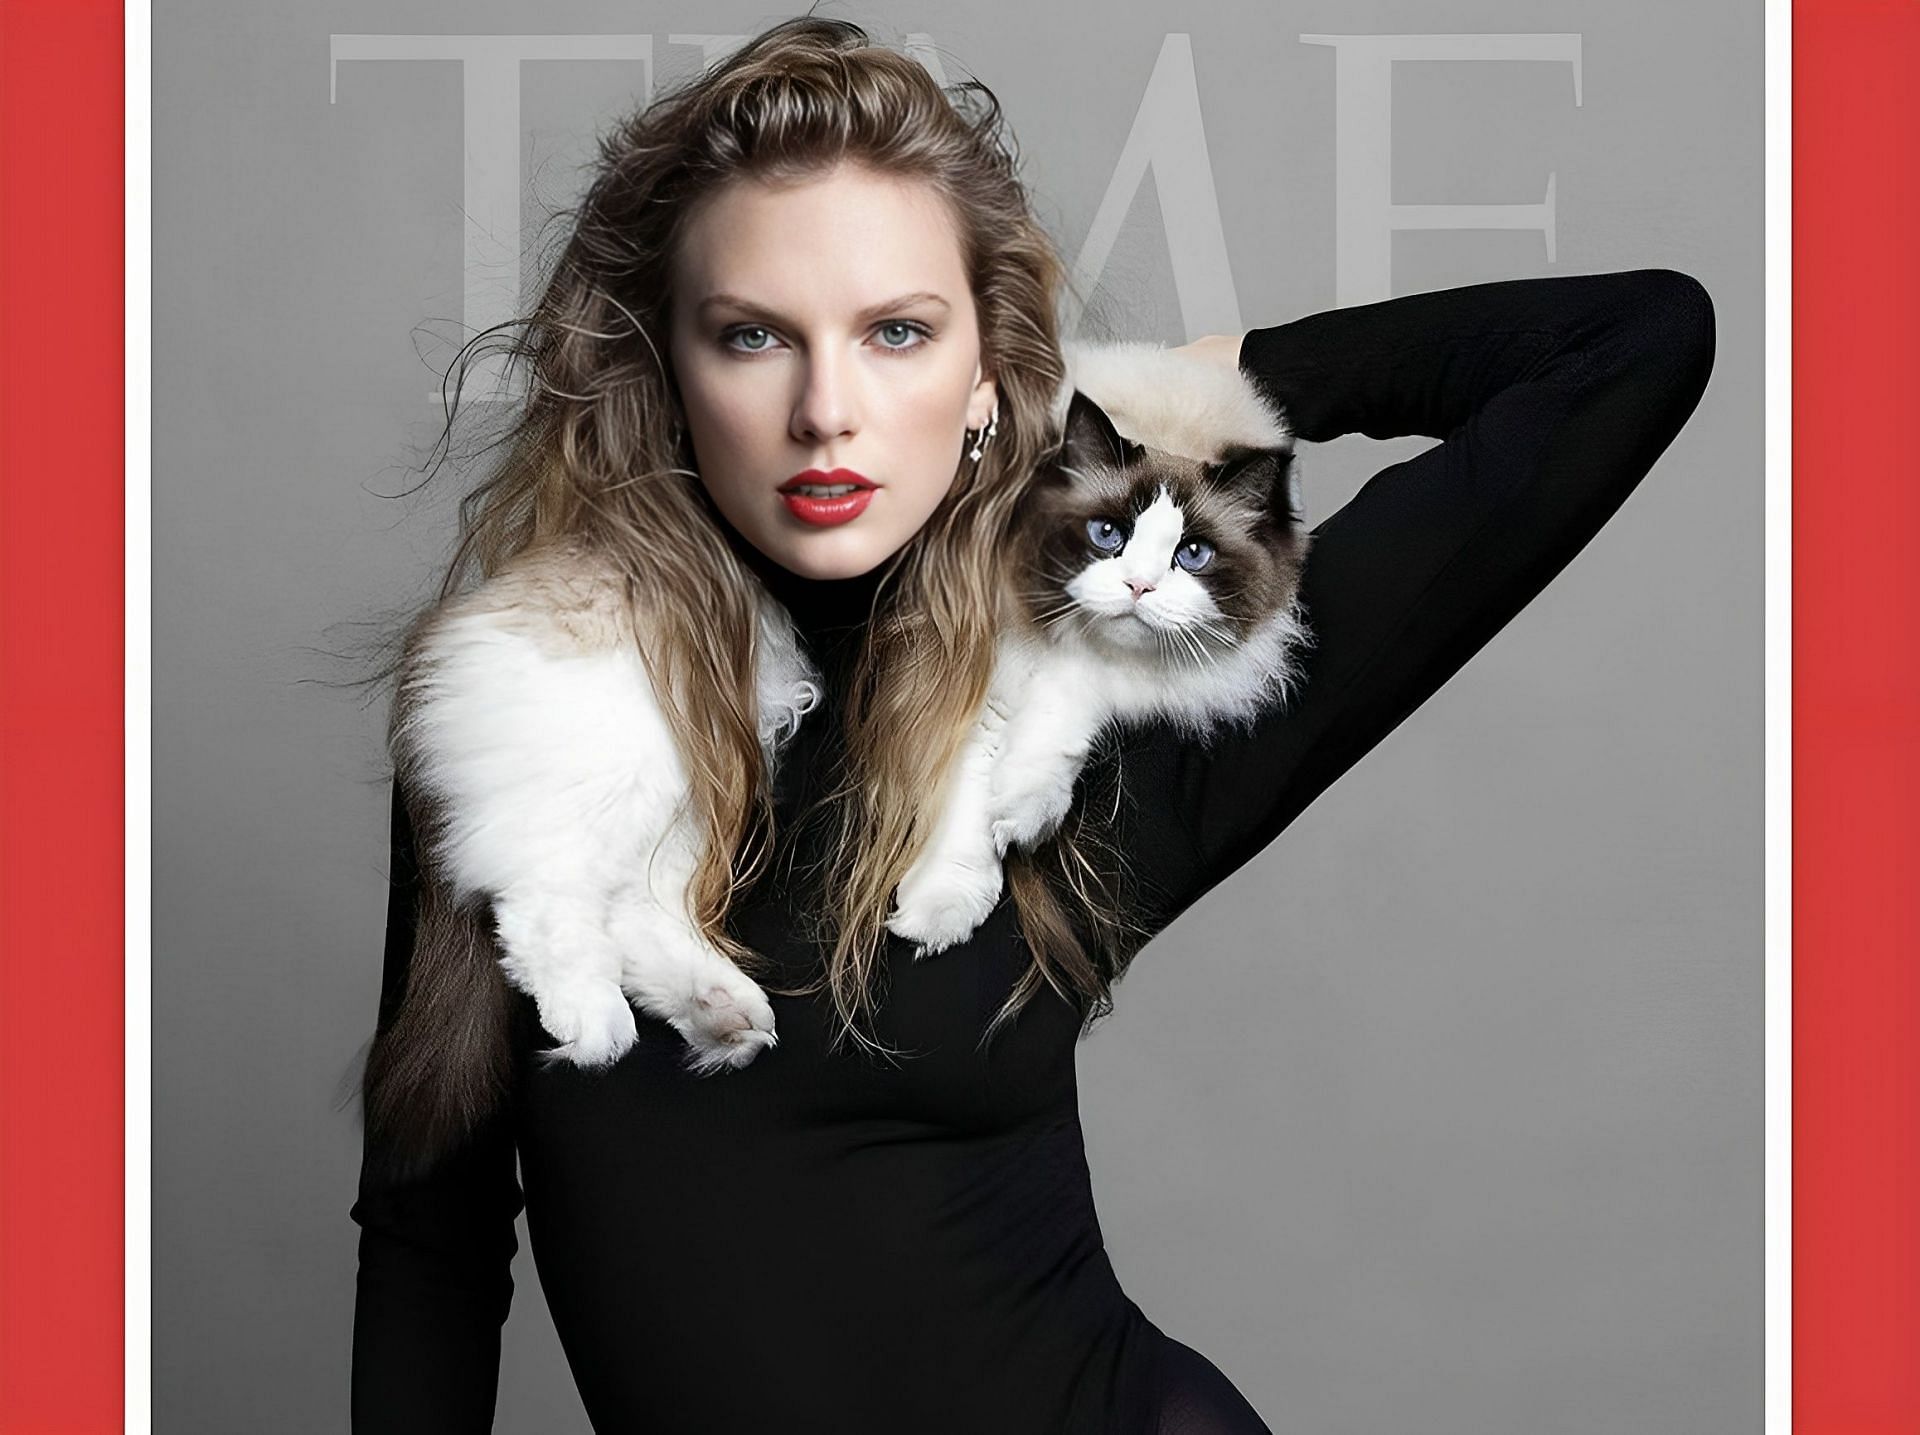 Taylor Swift on Time